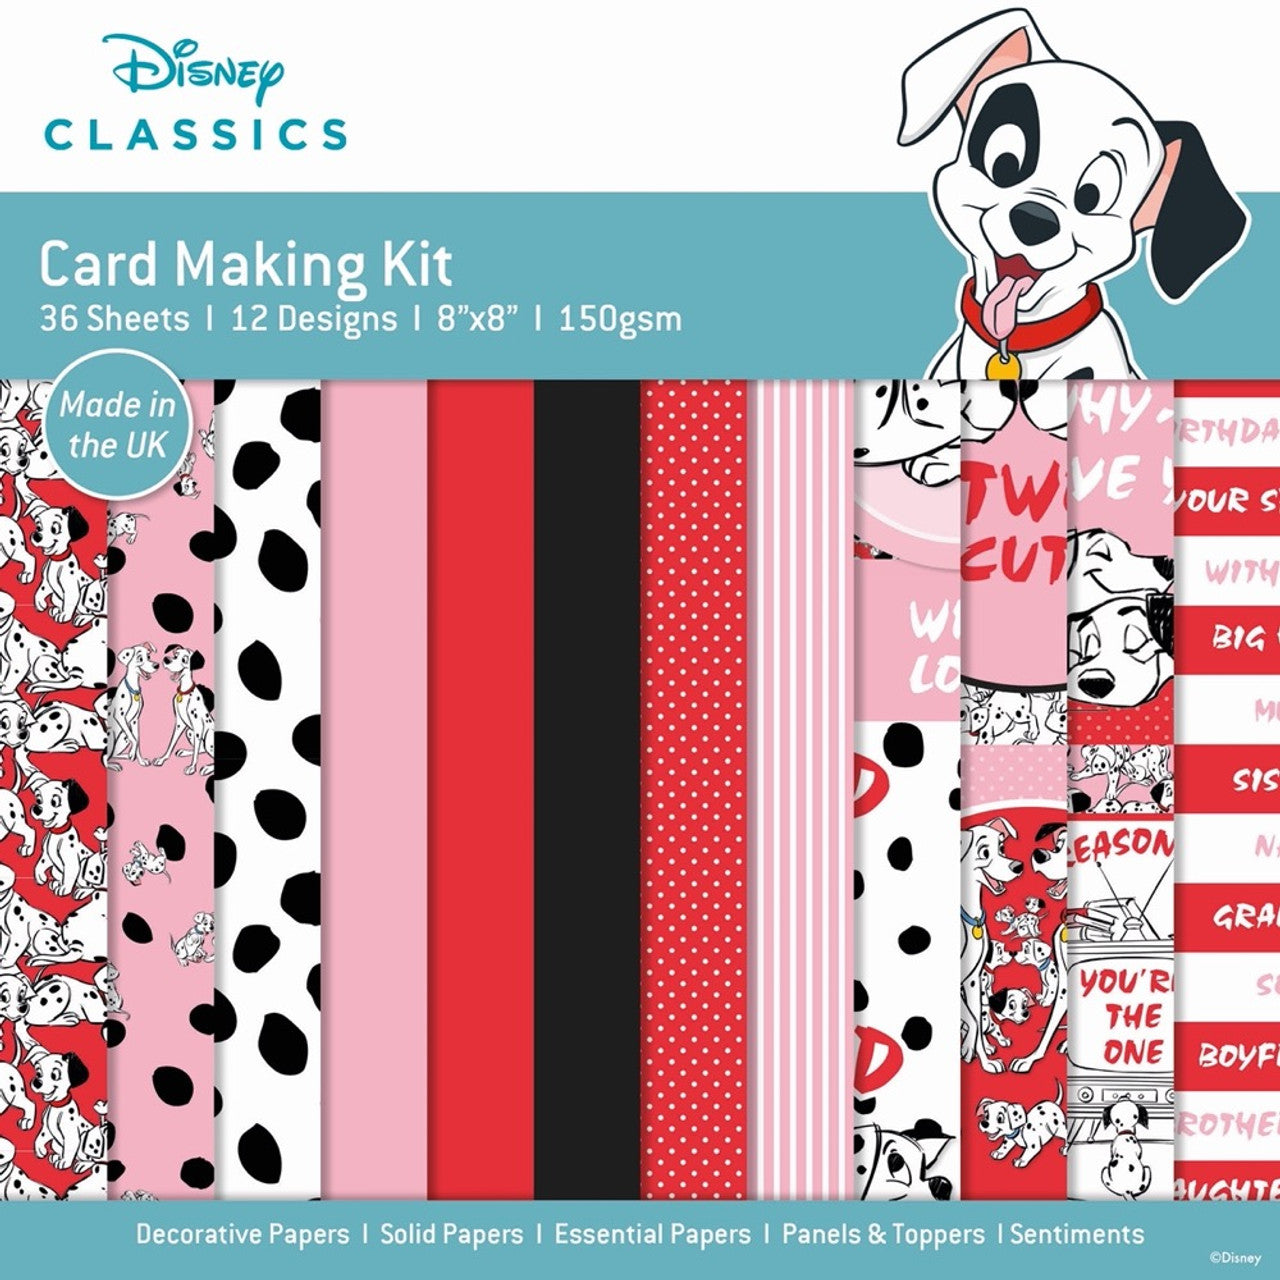 Disney classices Card Making Kit 101 Dalmations